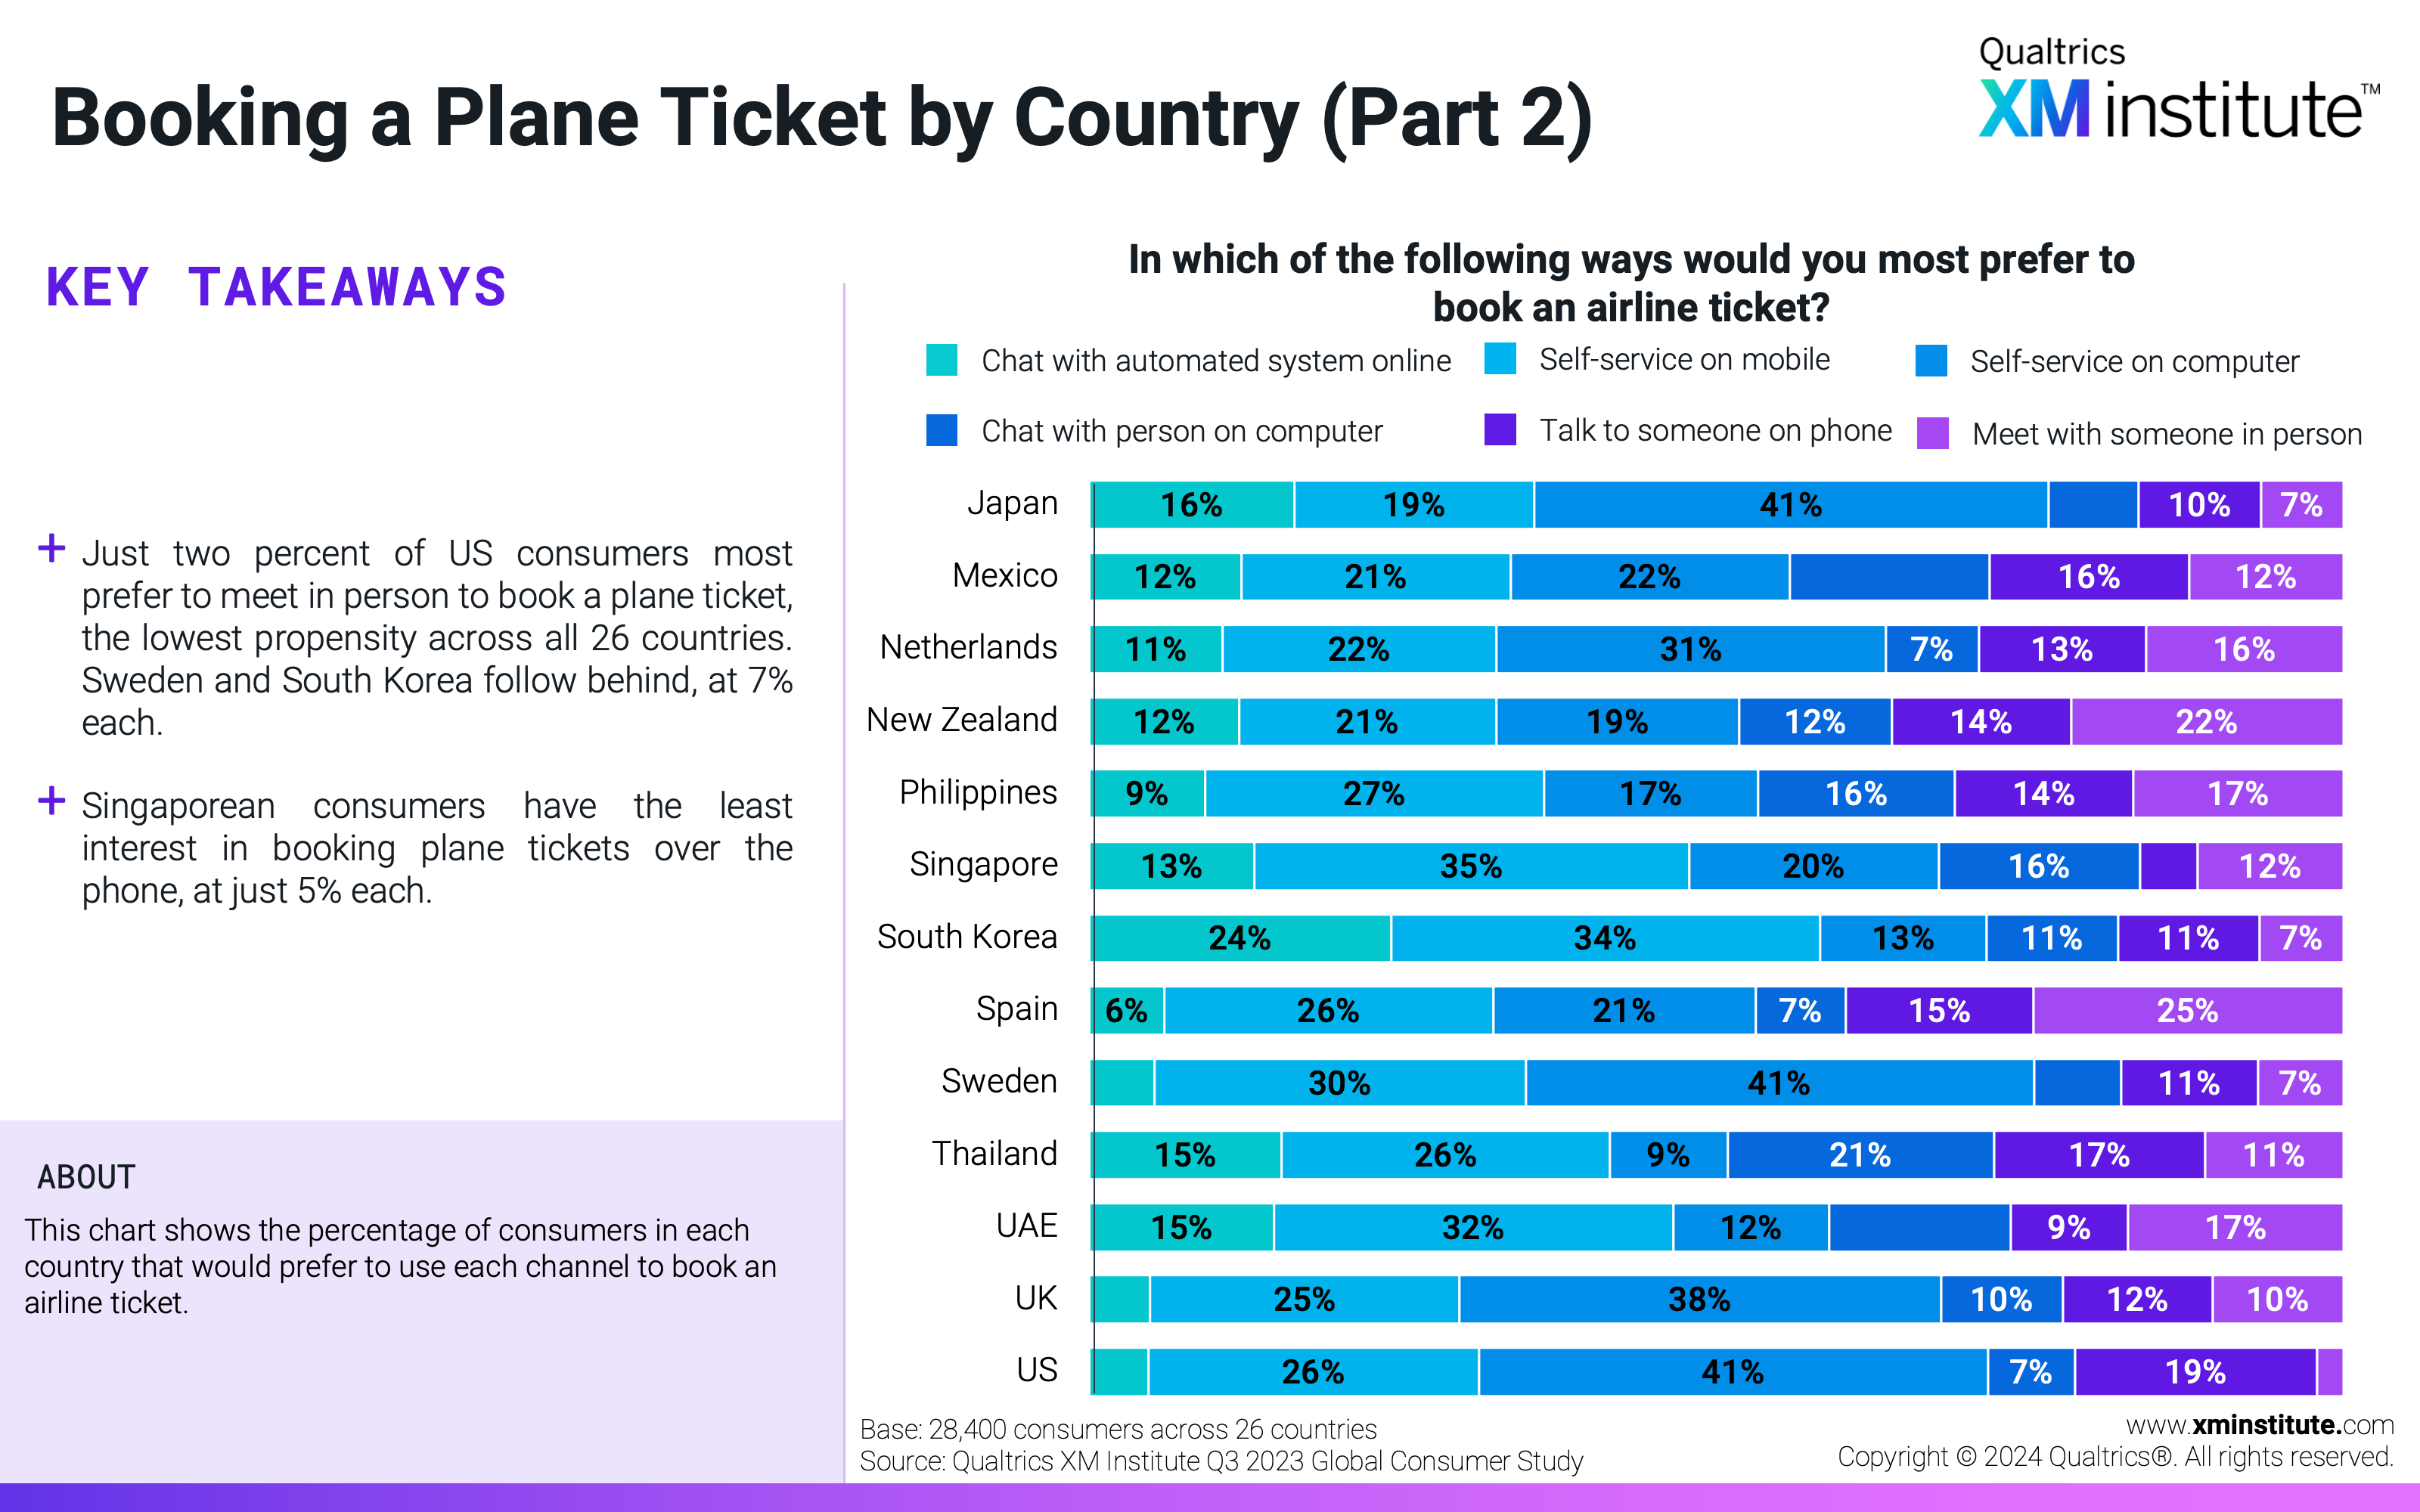 This chart shows the percentage of consumers in each country that would prefer to use each channel to book an airline ticket. 